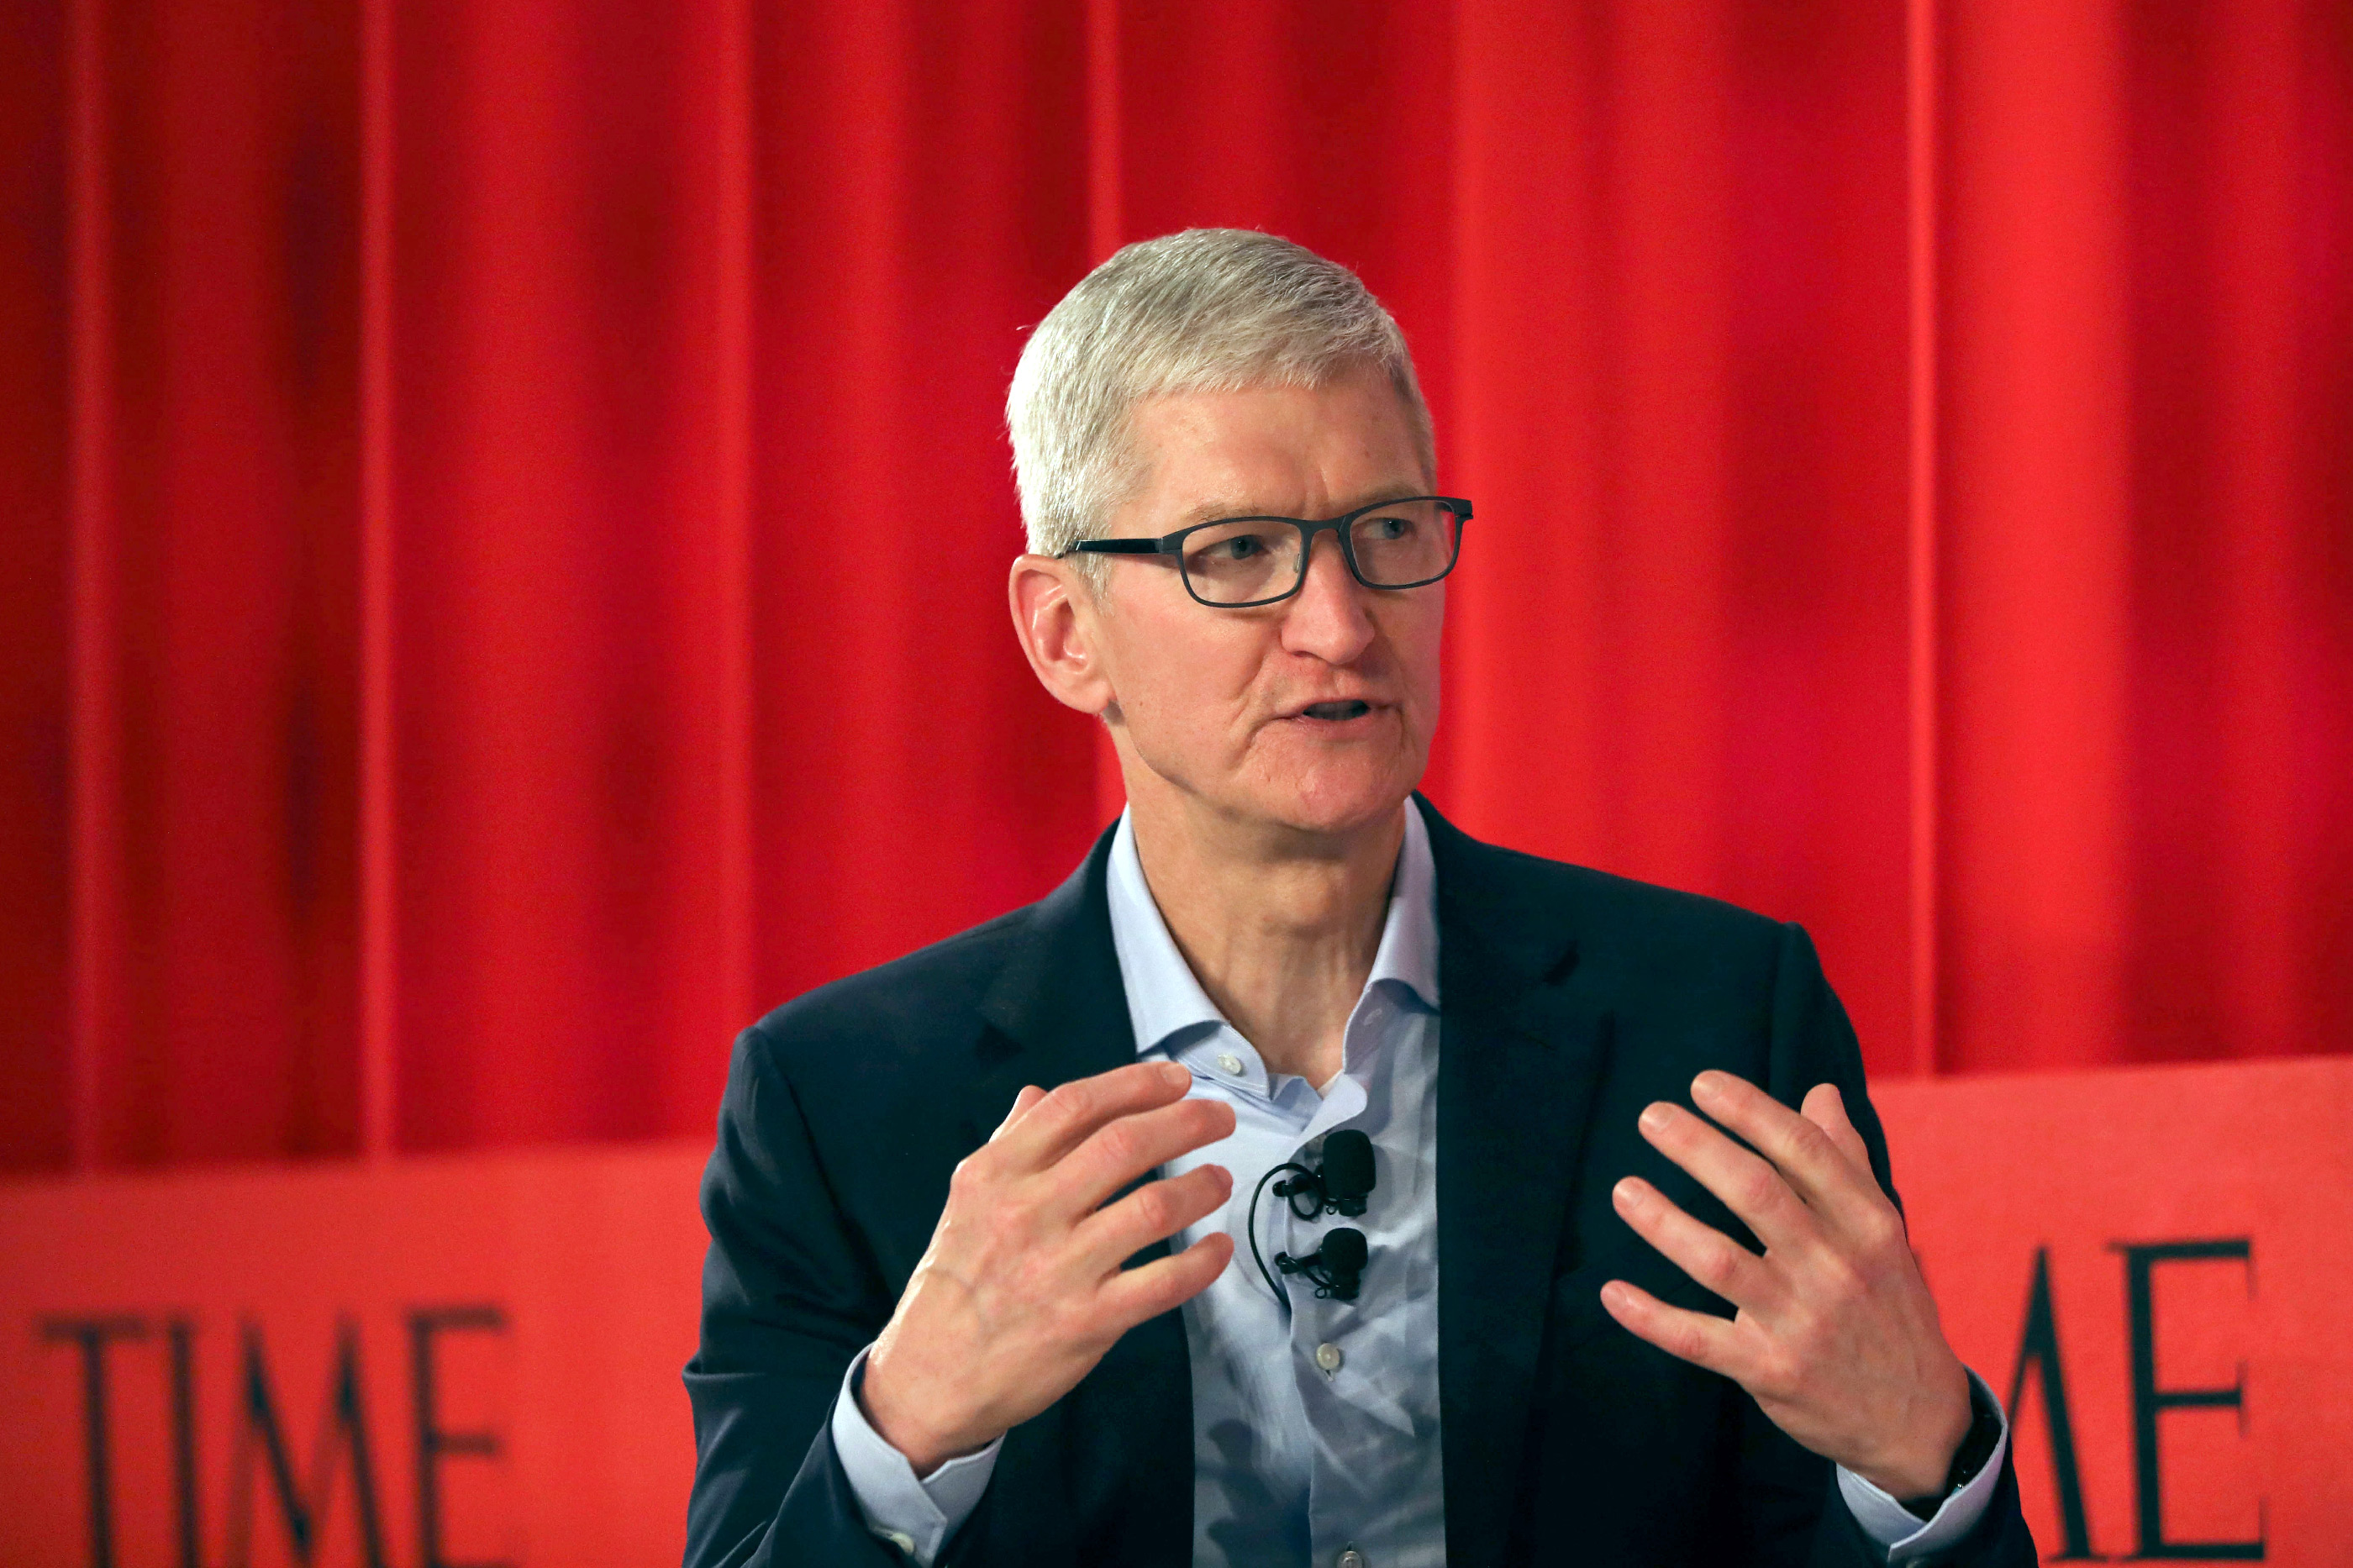 Apple CEO Tim Cook Says This Is the Most Important Skill Young People Should Learn Right Now